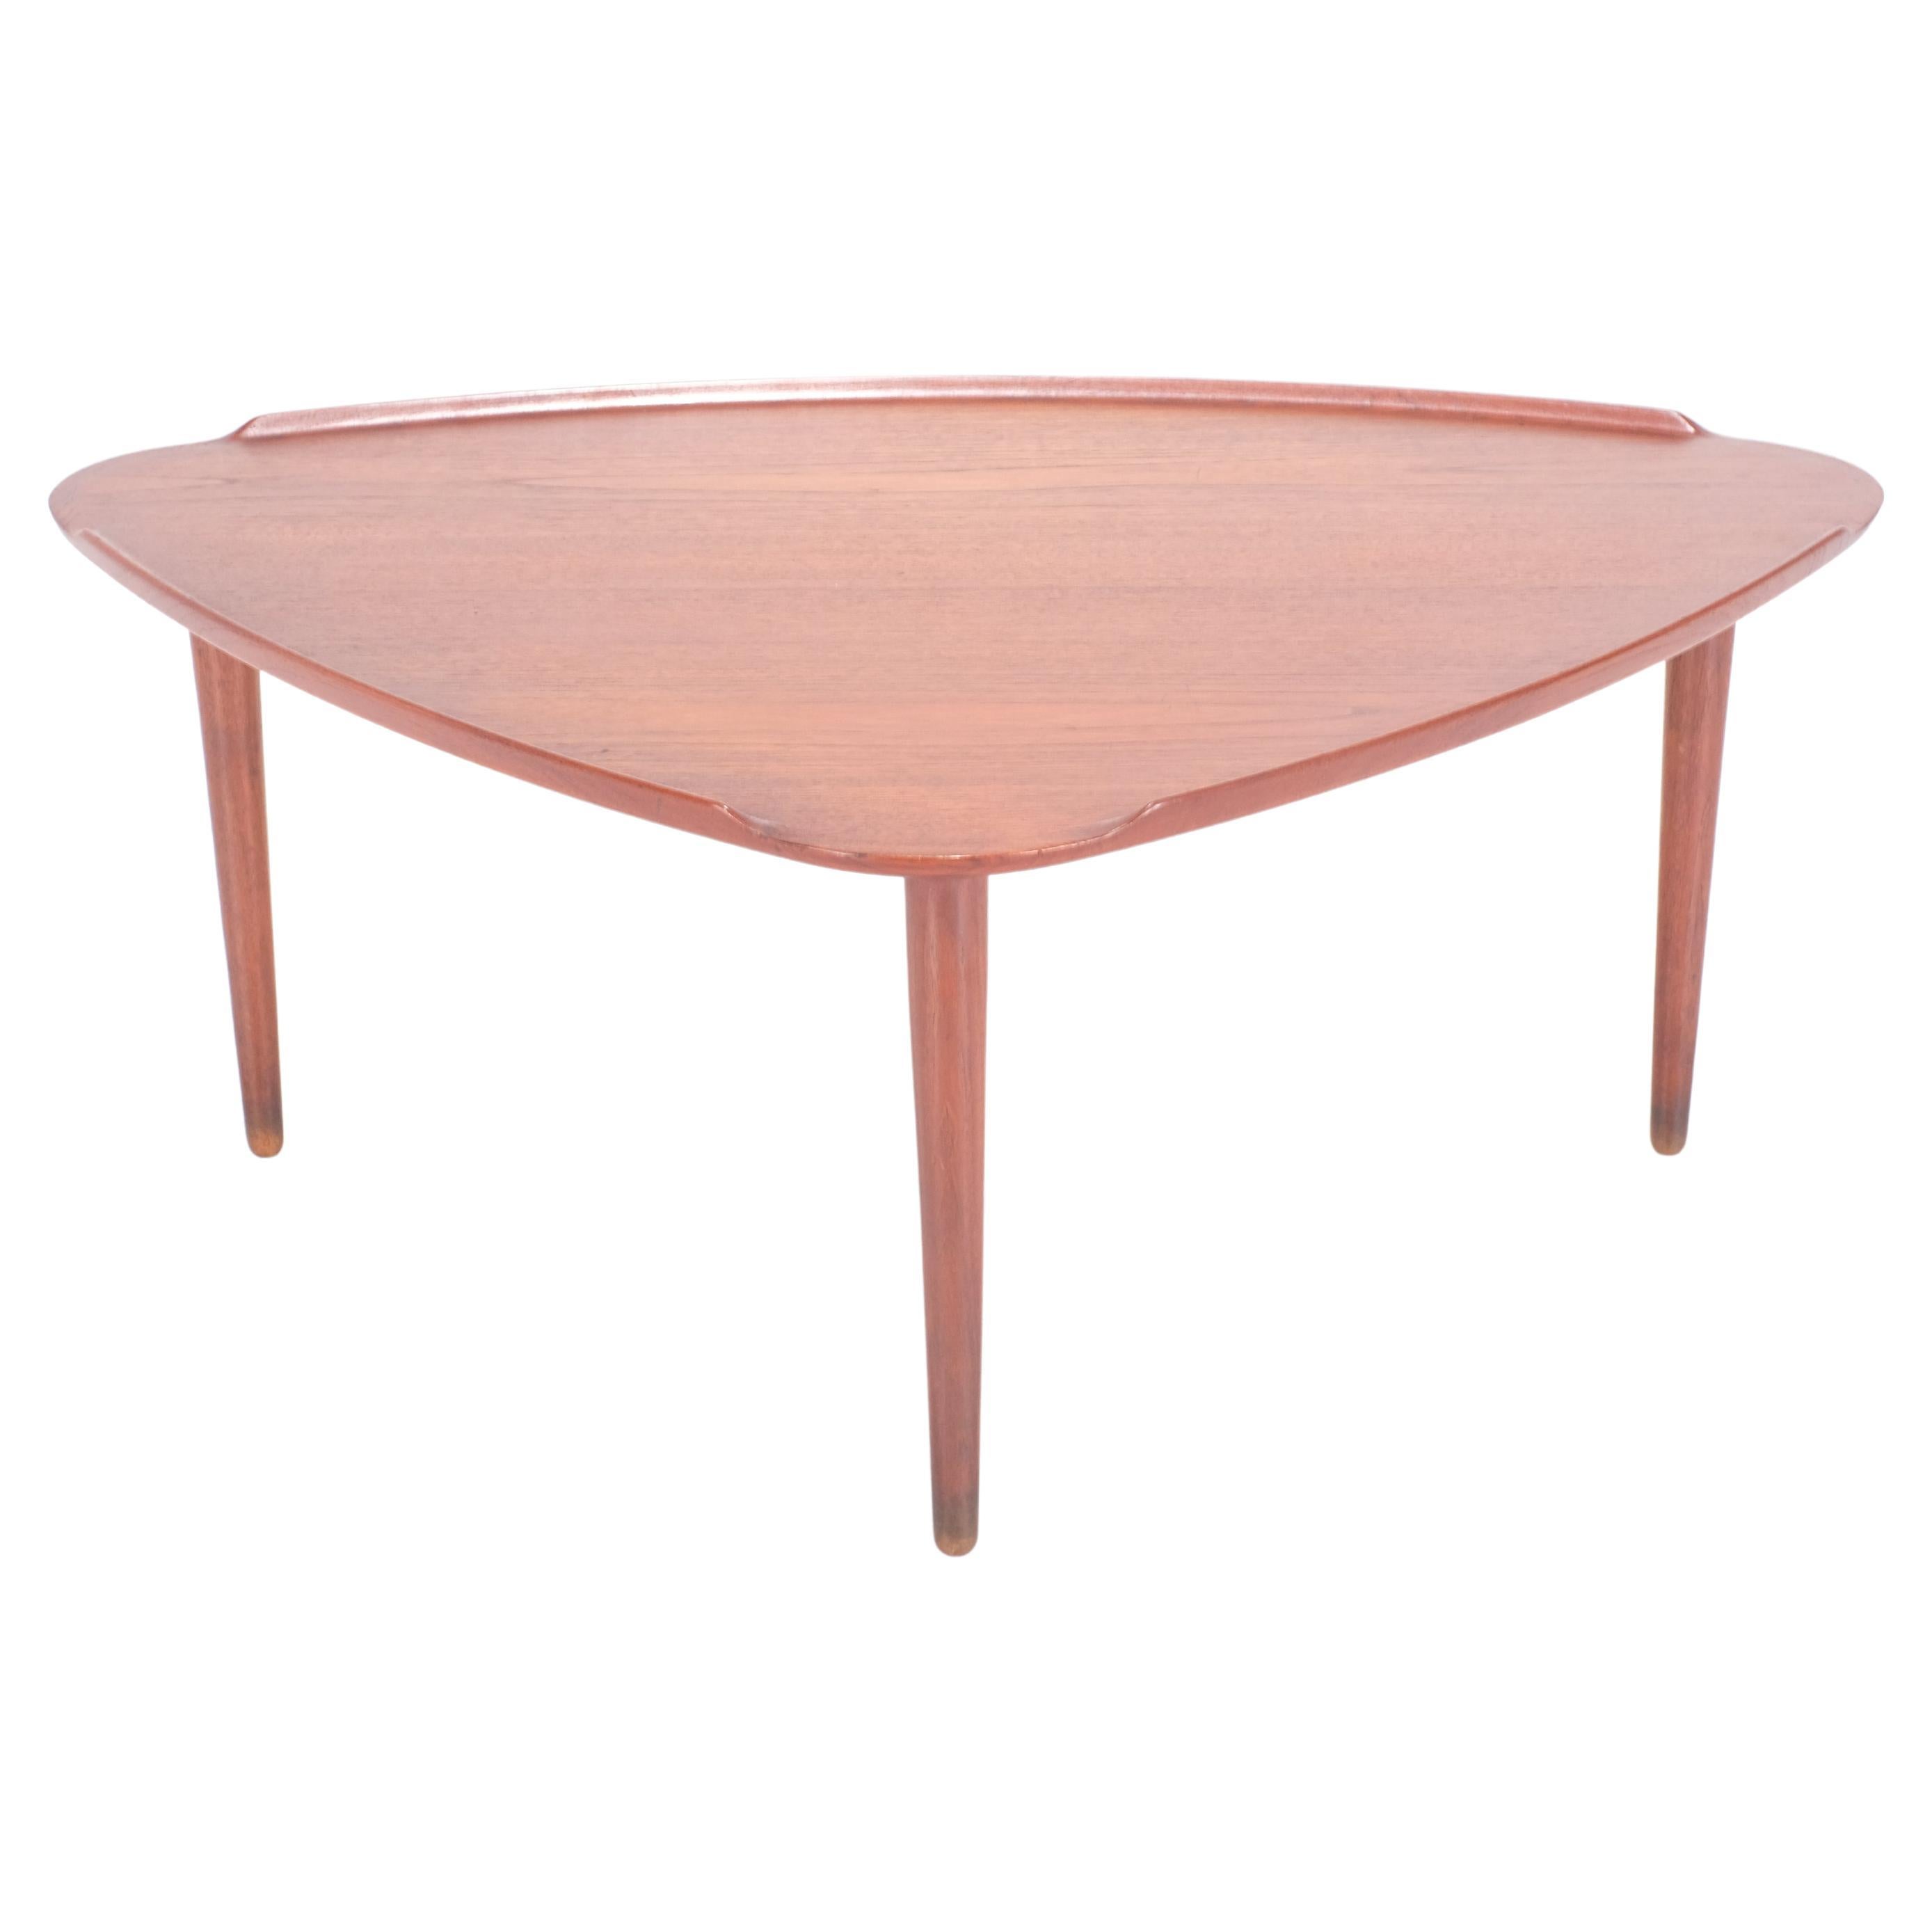 Amazing coffee table by Aakjaer Jorgensen for Bramminge - 1960s